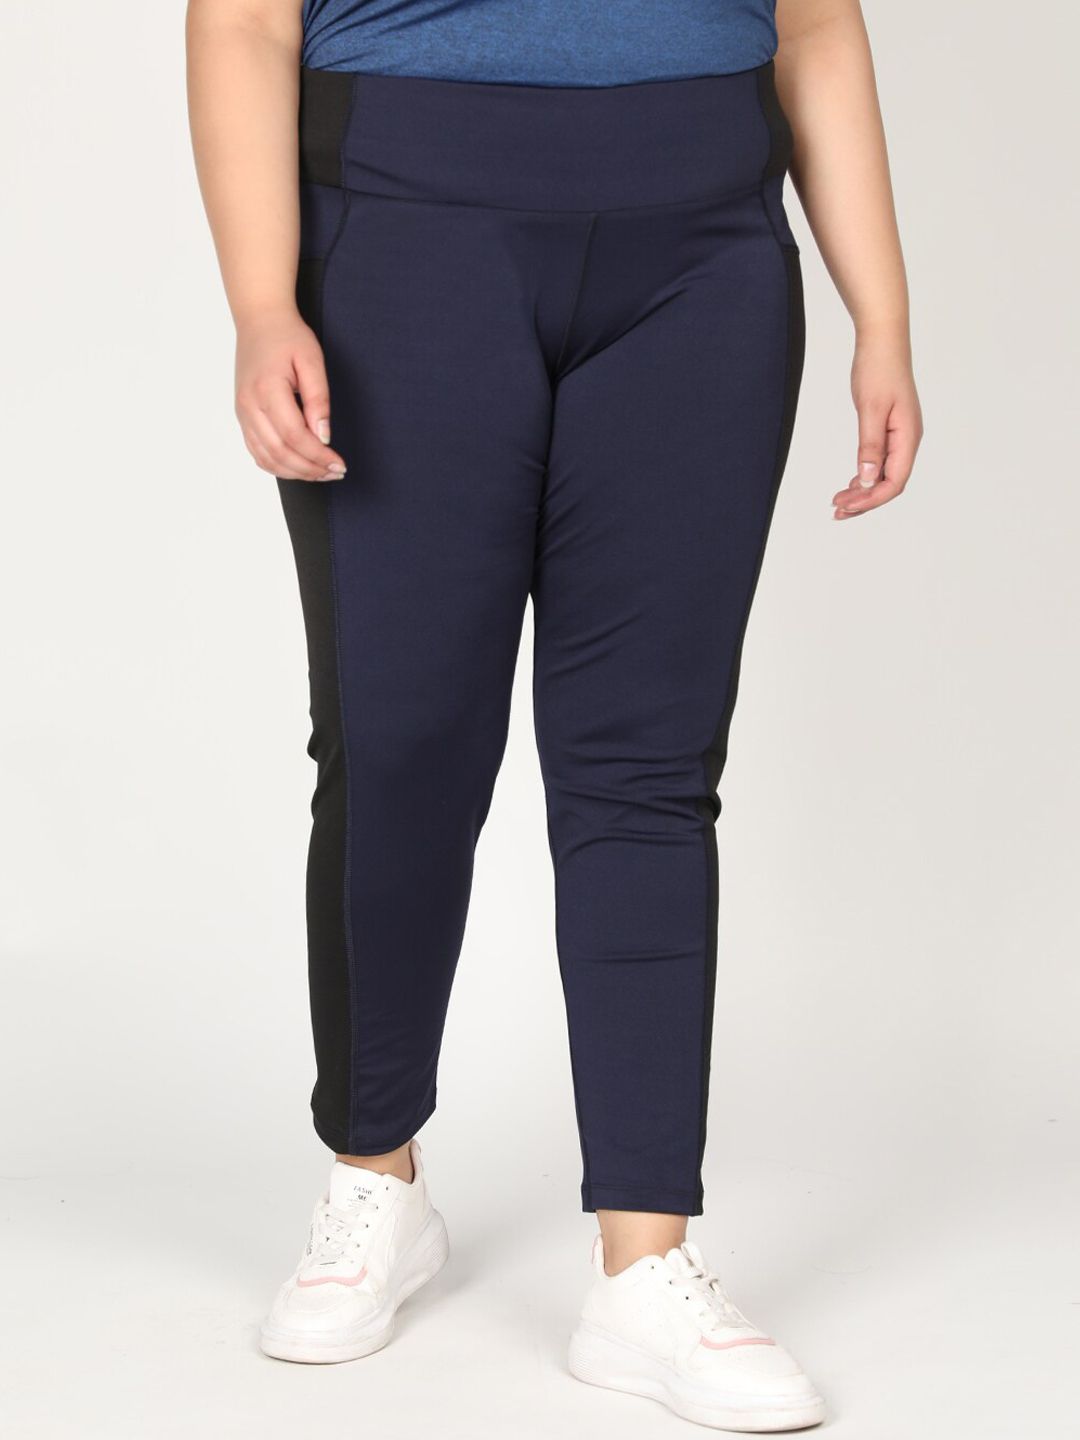 CHKOKKO Plus Women Navy Blue Solid Skinny Fit Tights Price in India